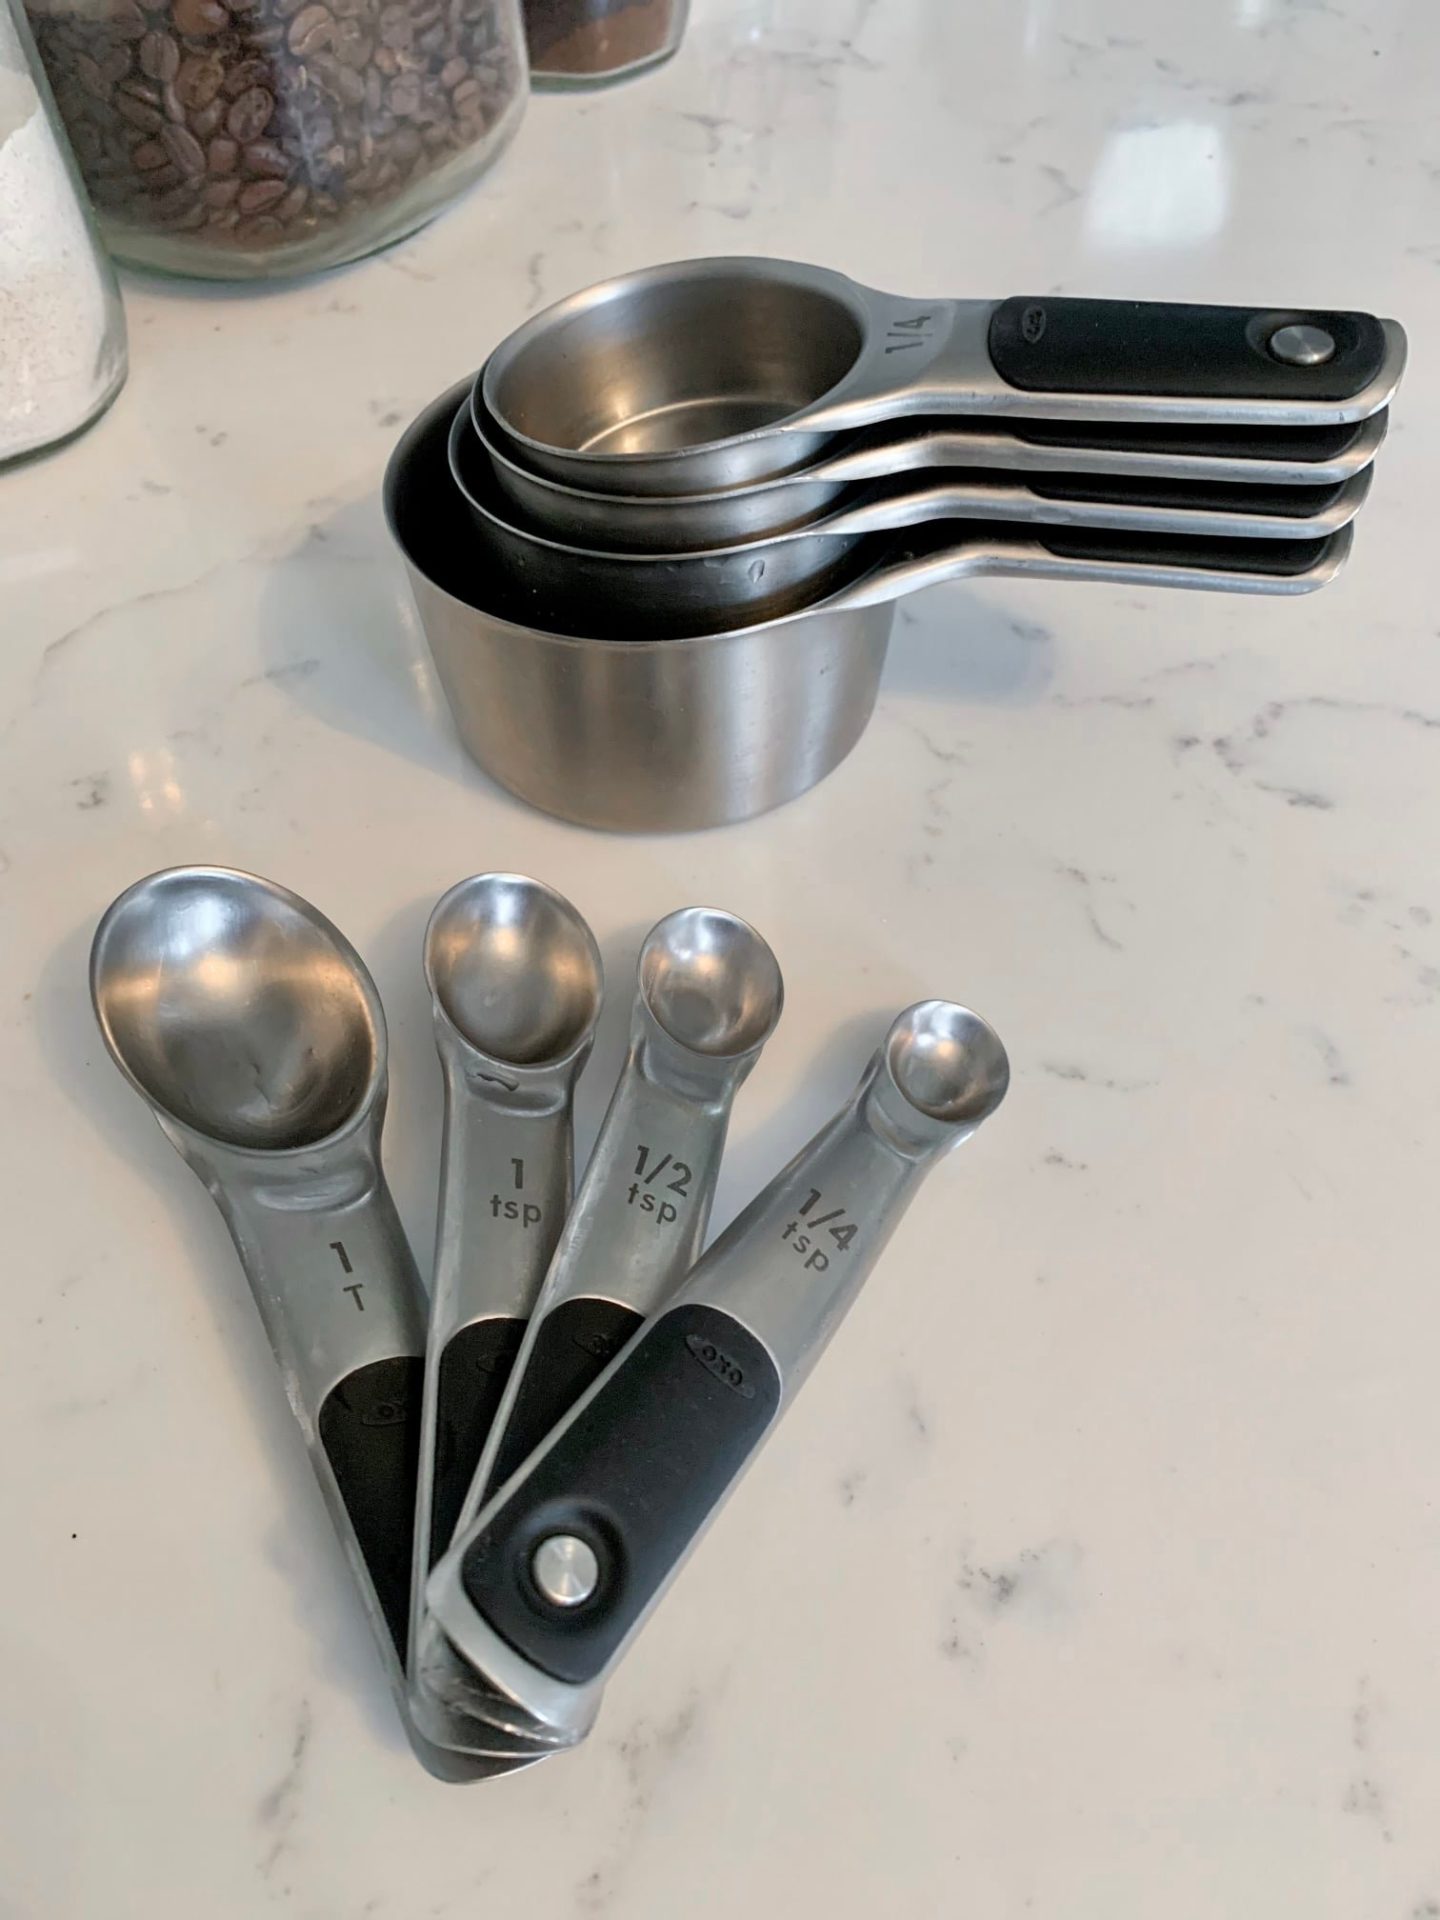 https://livinginyellow.com/wp-content/uploads/2022/02/Katy-Measuring-cups_spoons-scaled.jpeg